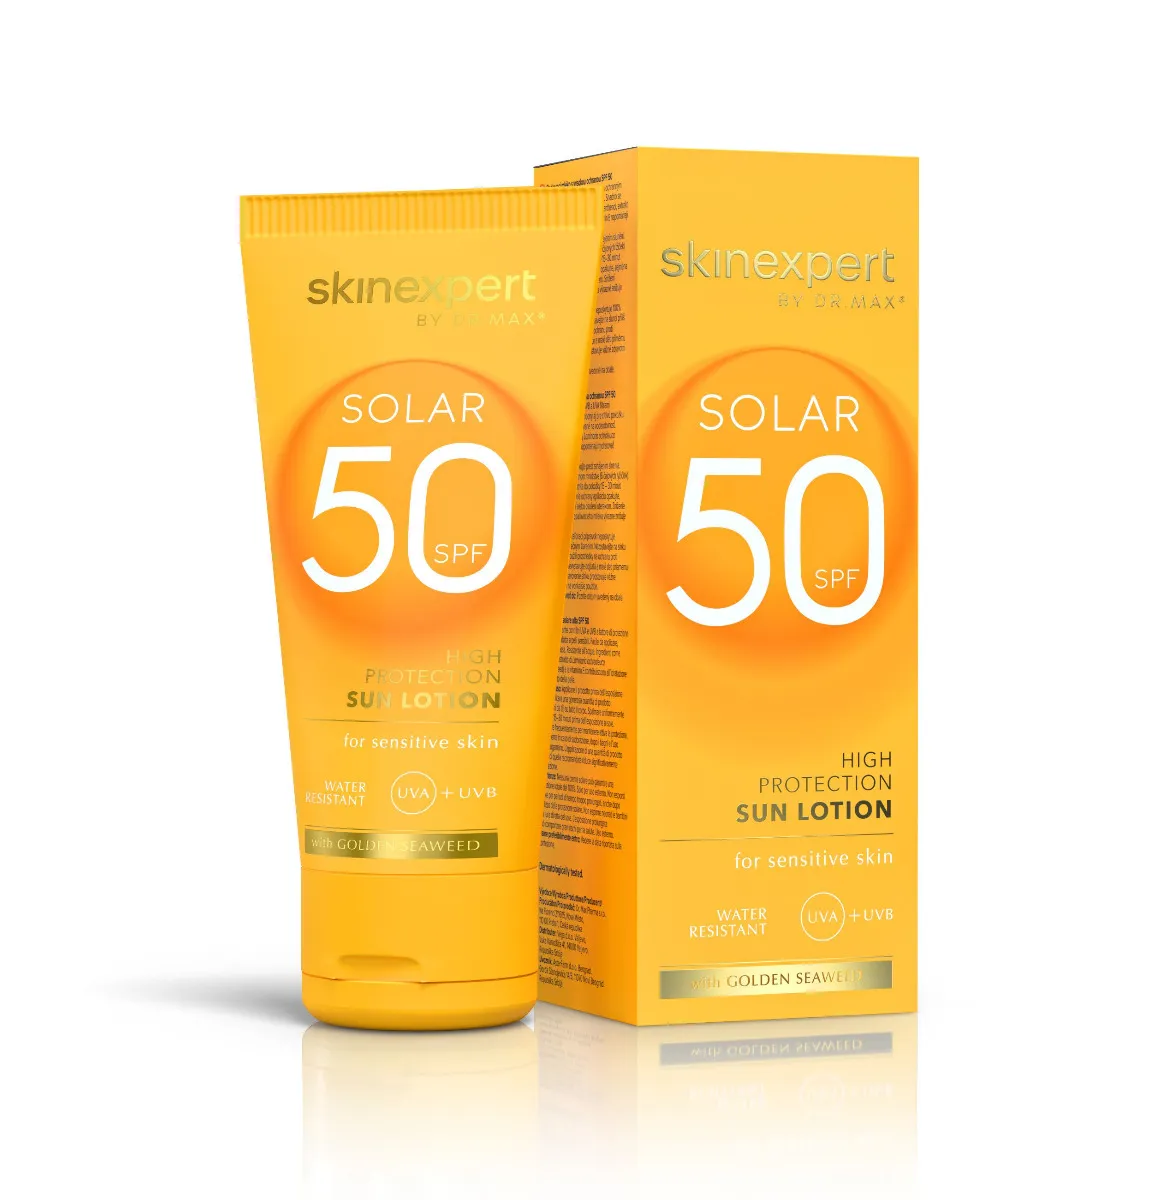 skinexpert BY DR.MAX SOLAR Sun Lotion SPF50